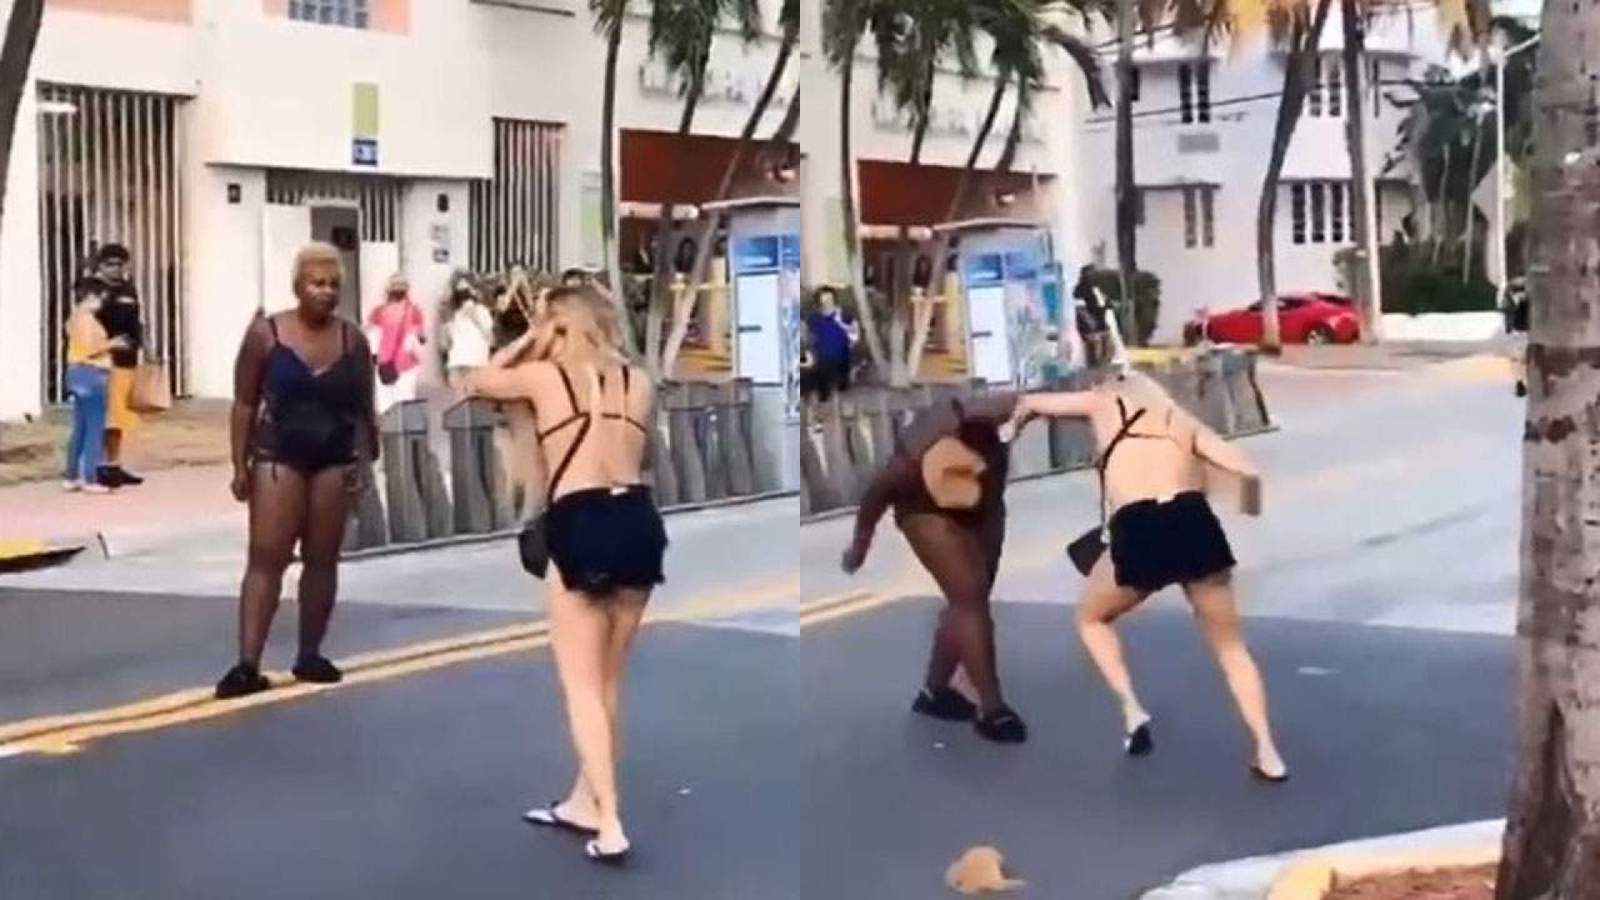 Women’s street fight leaves 1 injured in South Beach